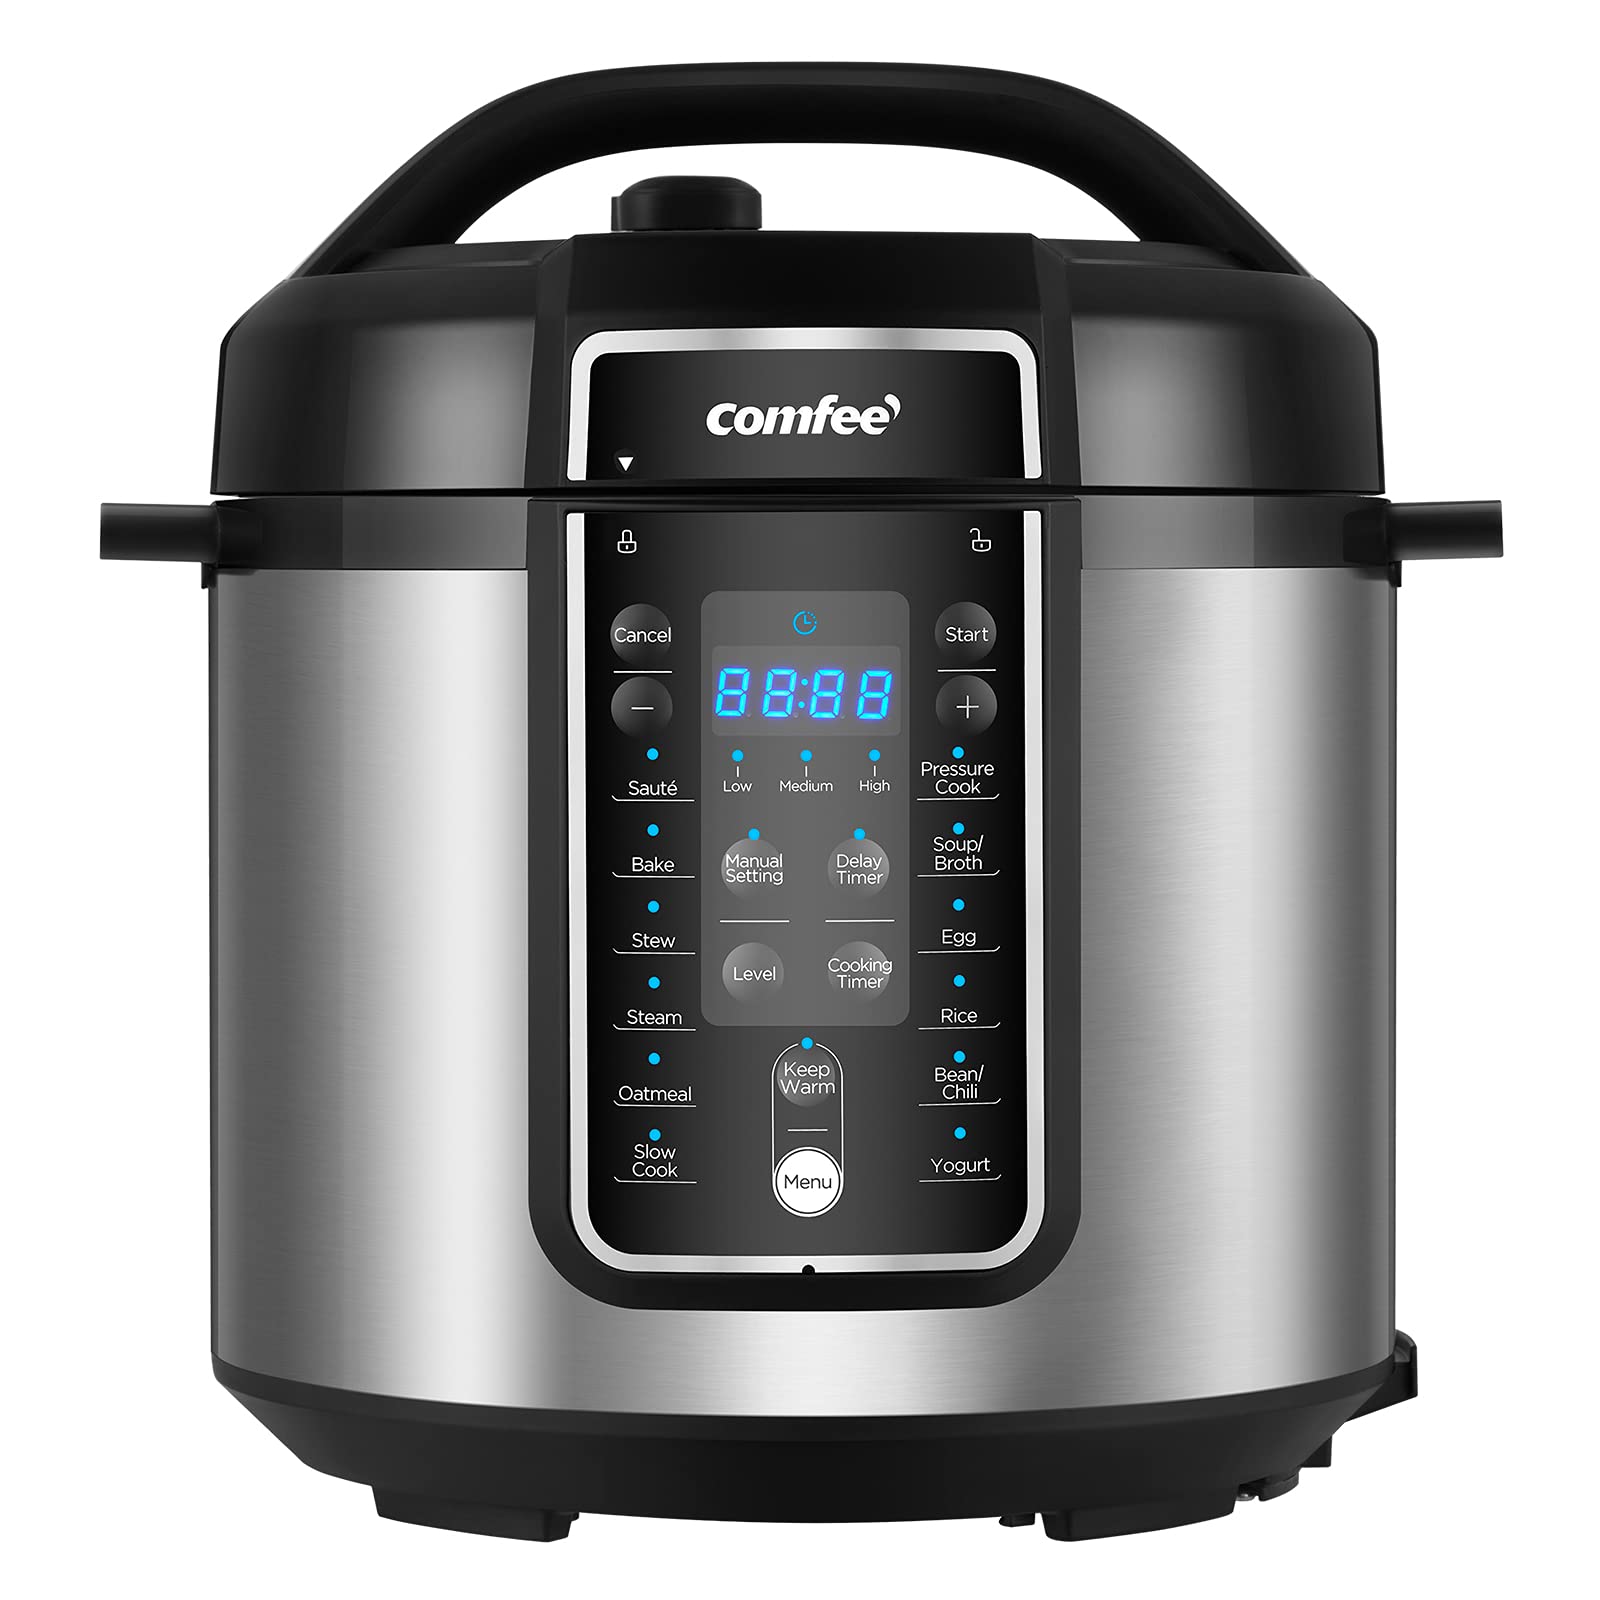 COMFEE' ’ Pressure Cooker 6 Quart with 12 Presets, Multi-Functional Programmable Slow Cooker, Rice Cooker, Steamer, Sauté pan, Egg Cooker, Warmer and More